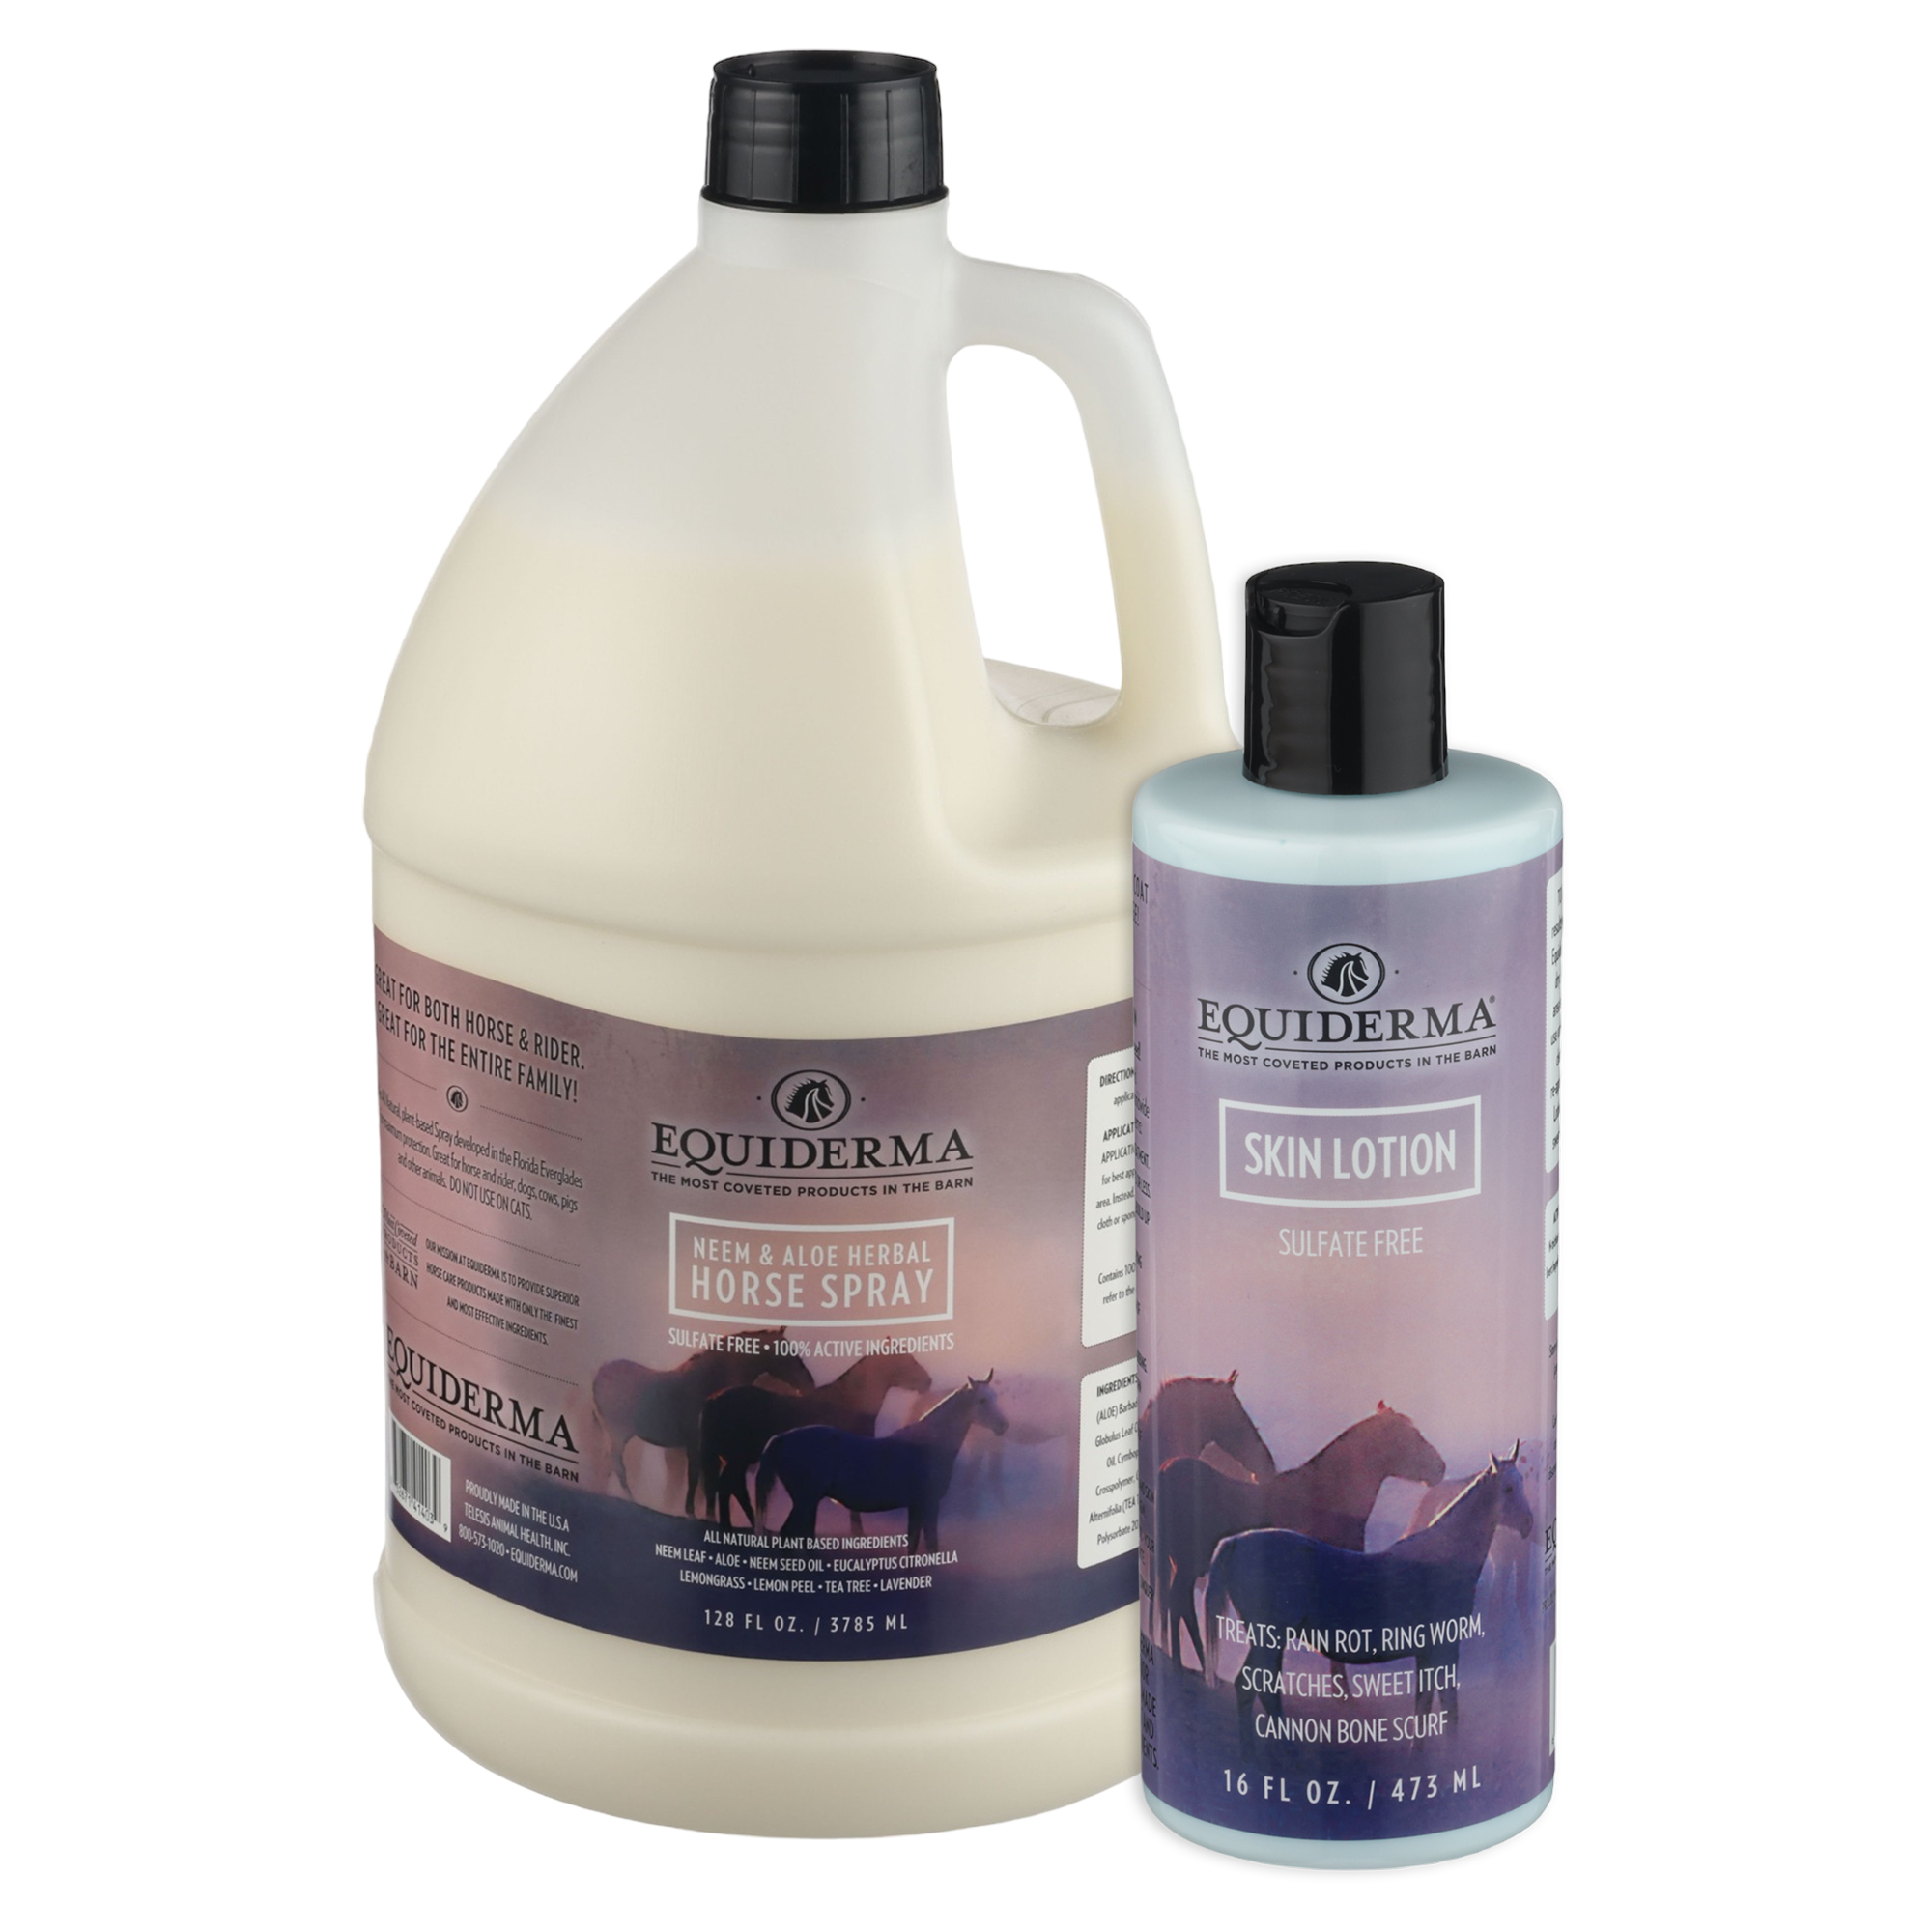 Image of SALE! Buy a Gallon of Horse Spray, Get a Bottle of Skin Lotion Free